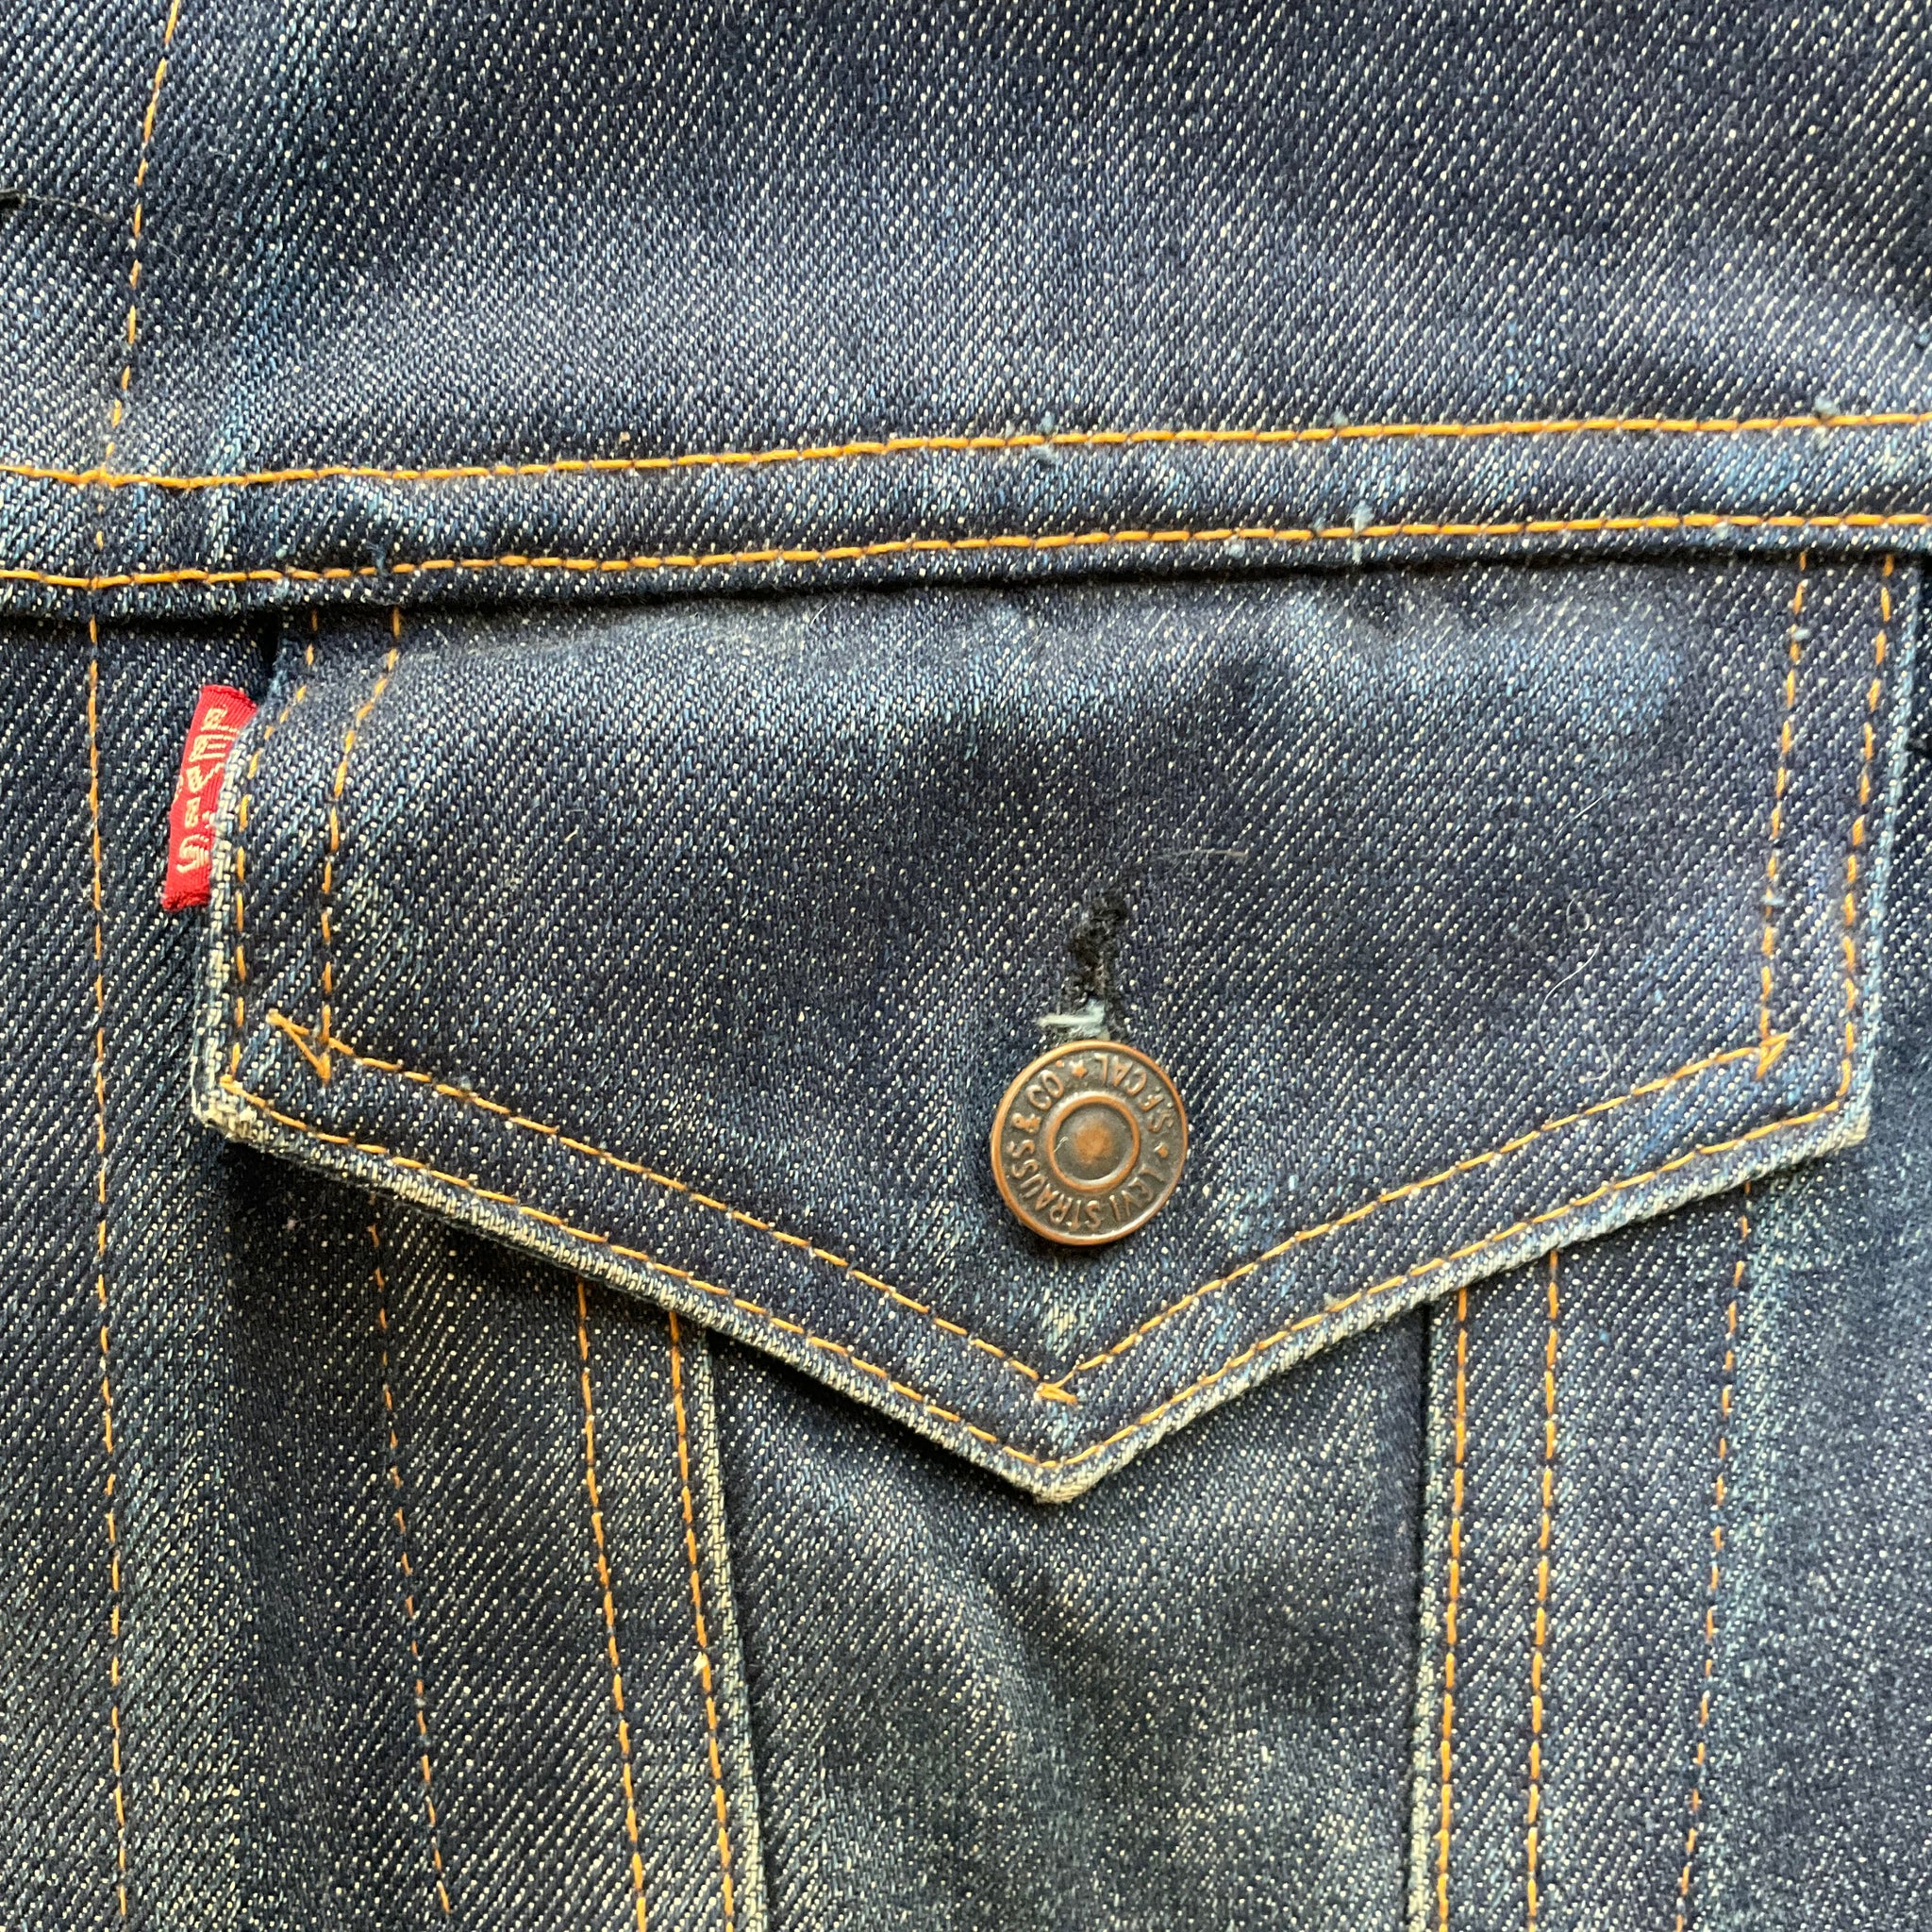 Vintage 1960’s Type 3 LEVI’S Big E 70505 Two Pocket Denim Trucker Jacket Size M - Made in USA